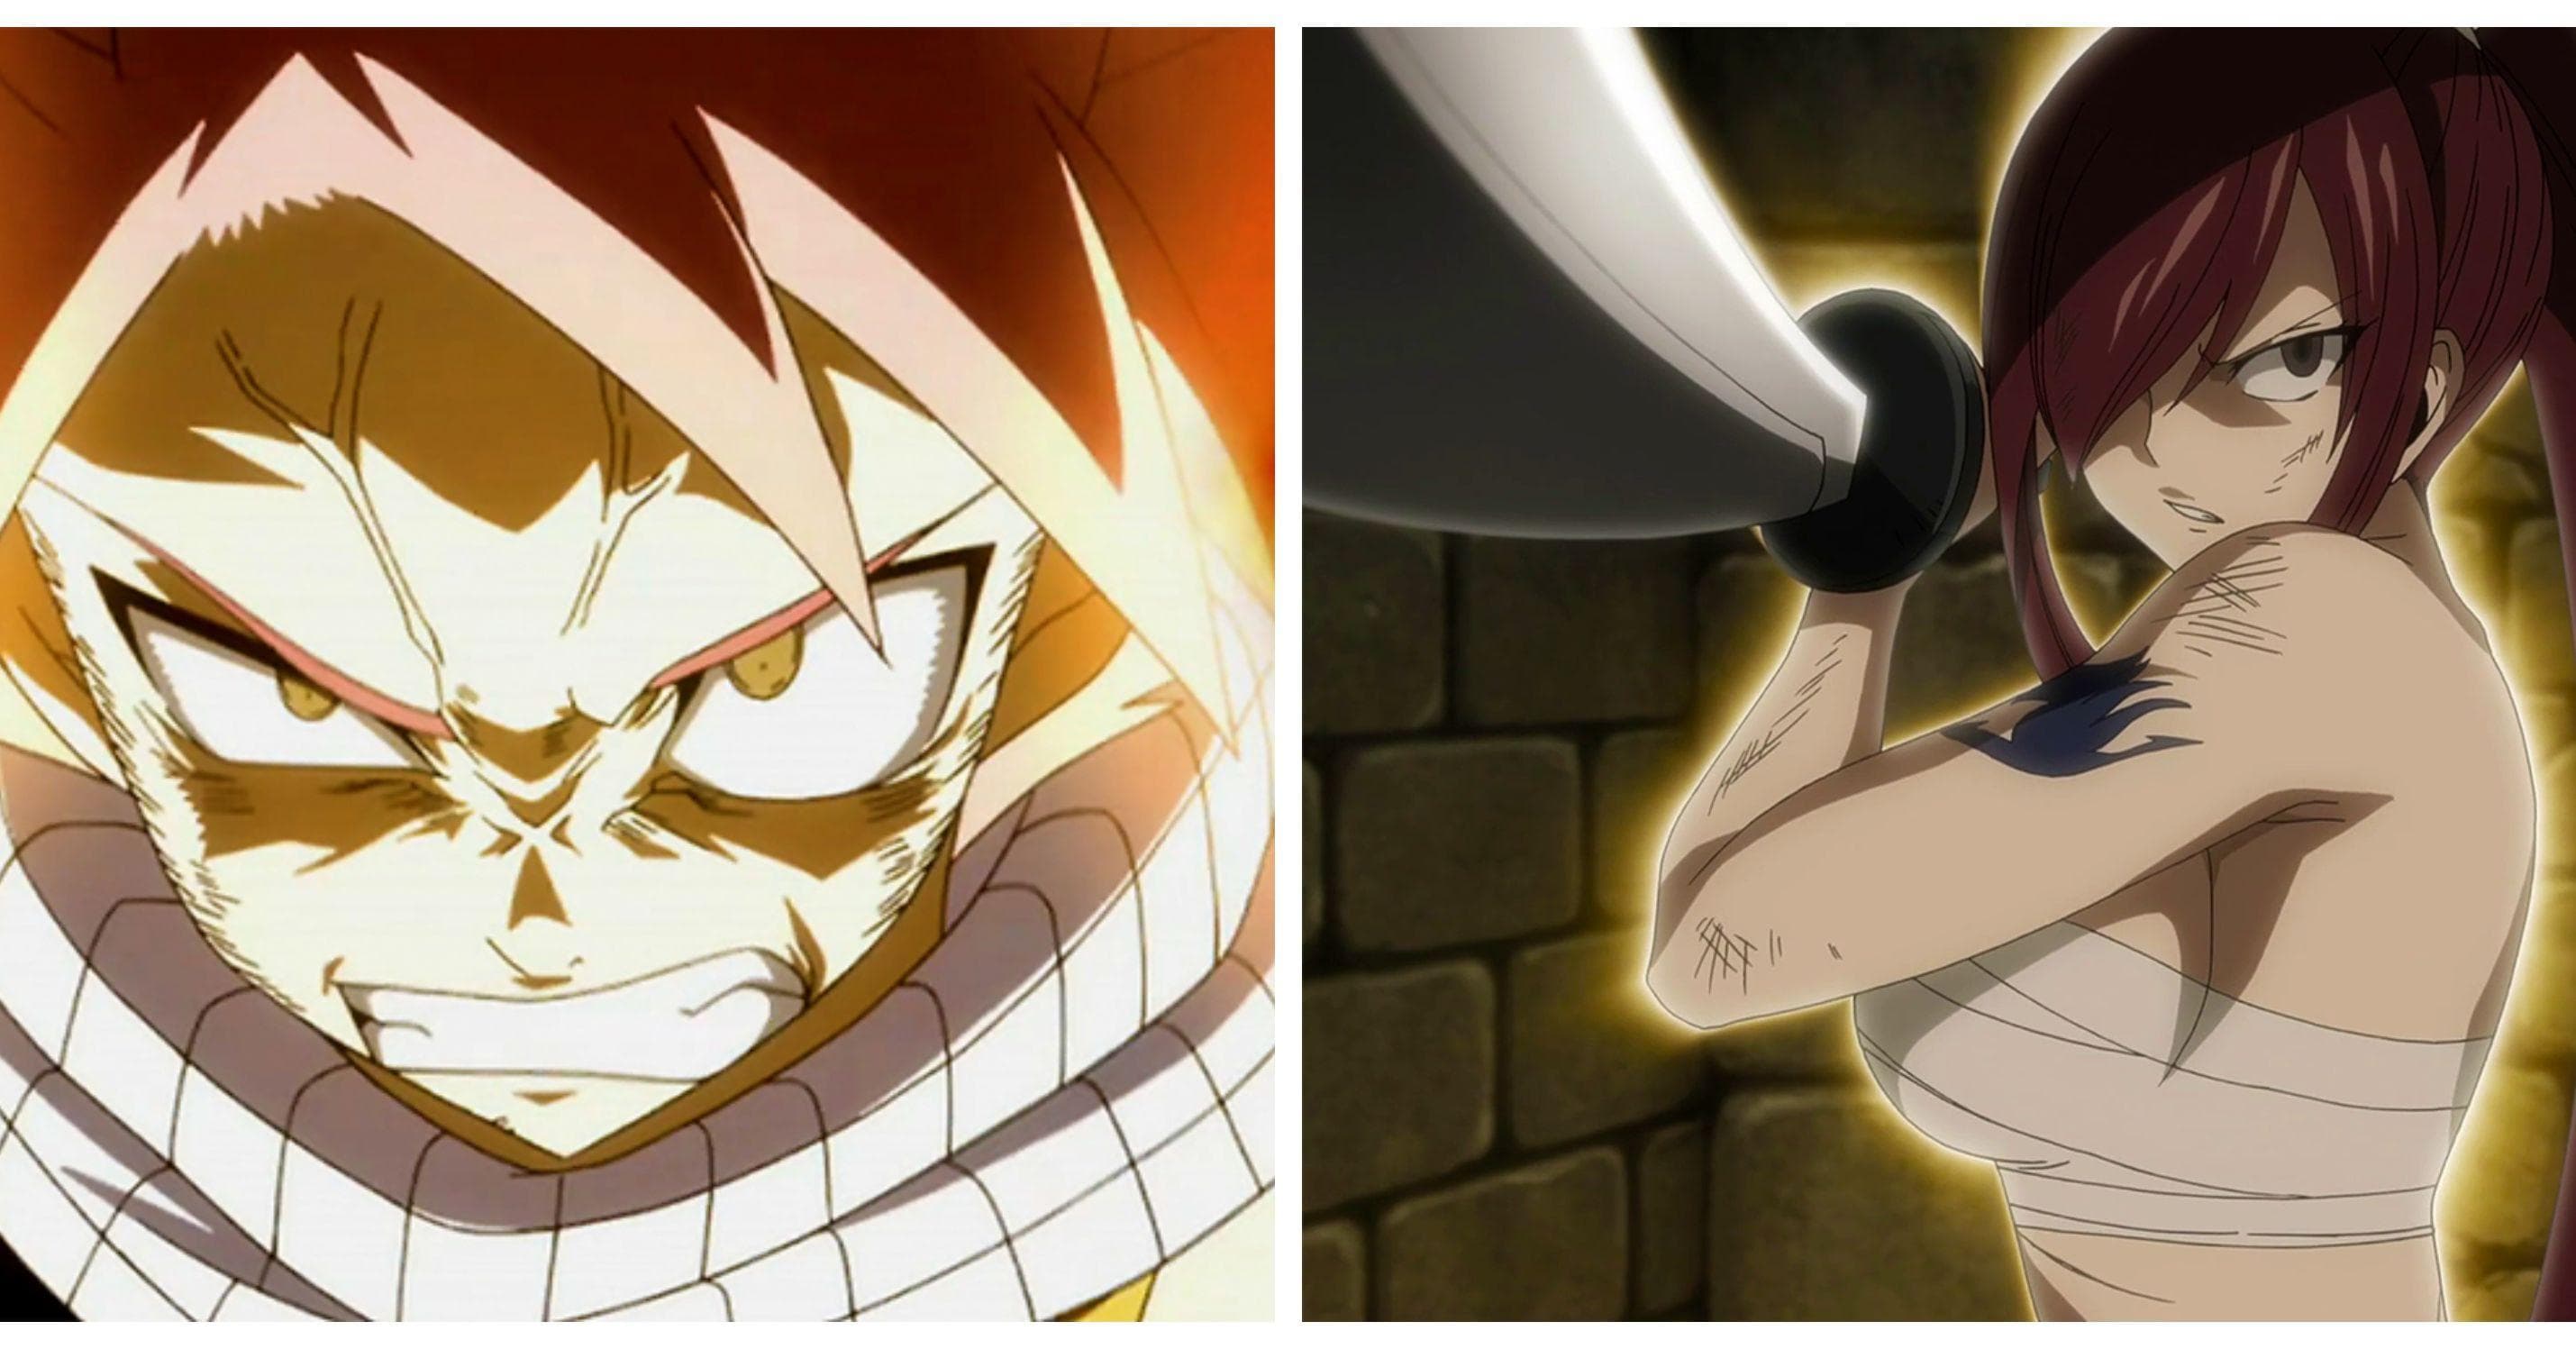 The 20 Strongest Fairy Tail Guild Members, Ranked